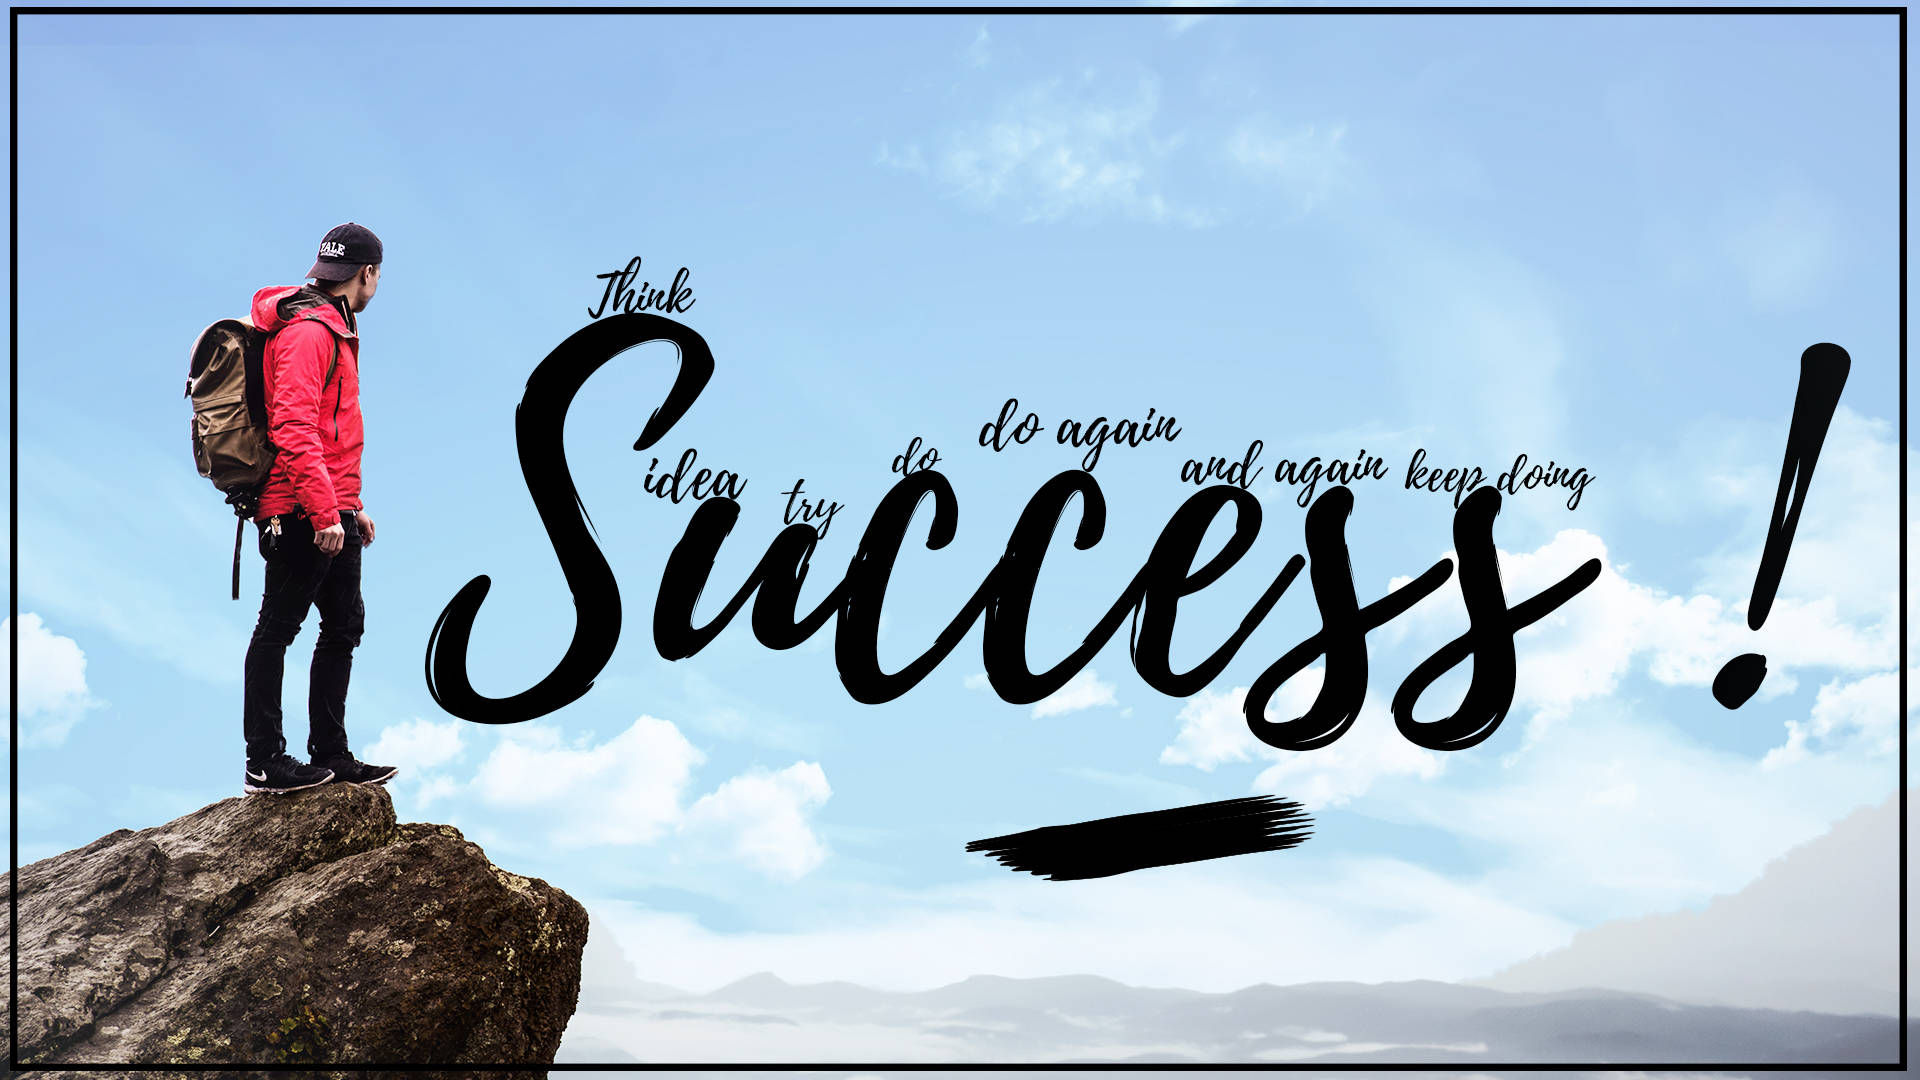 Free Success Wallpaper Downloads, [100+] Success Wallpapers for FREE |  